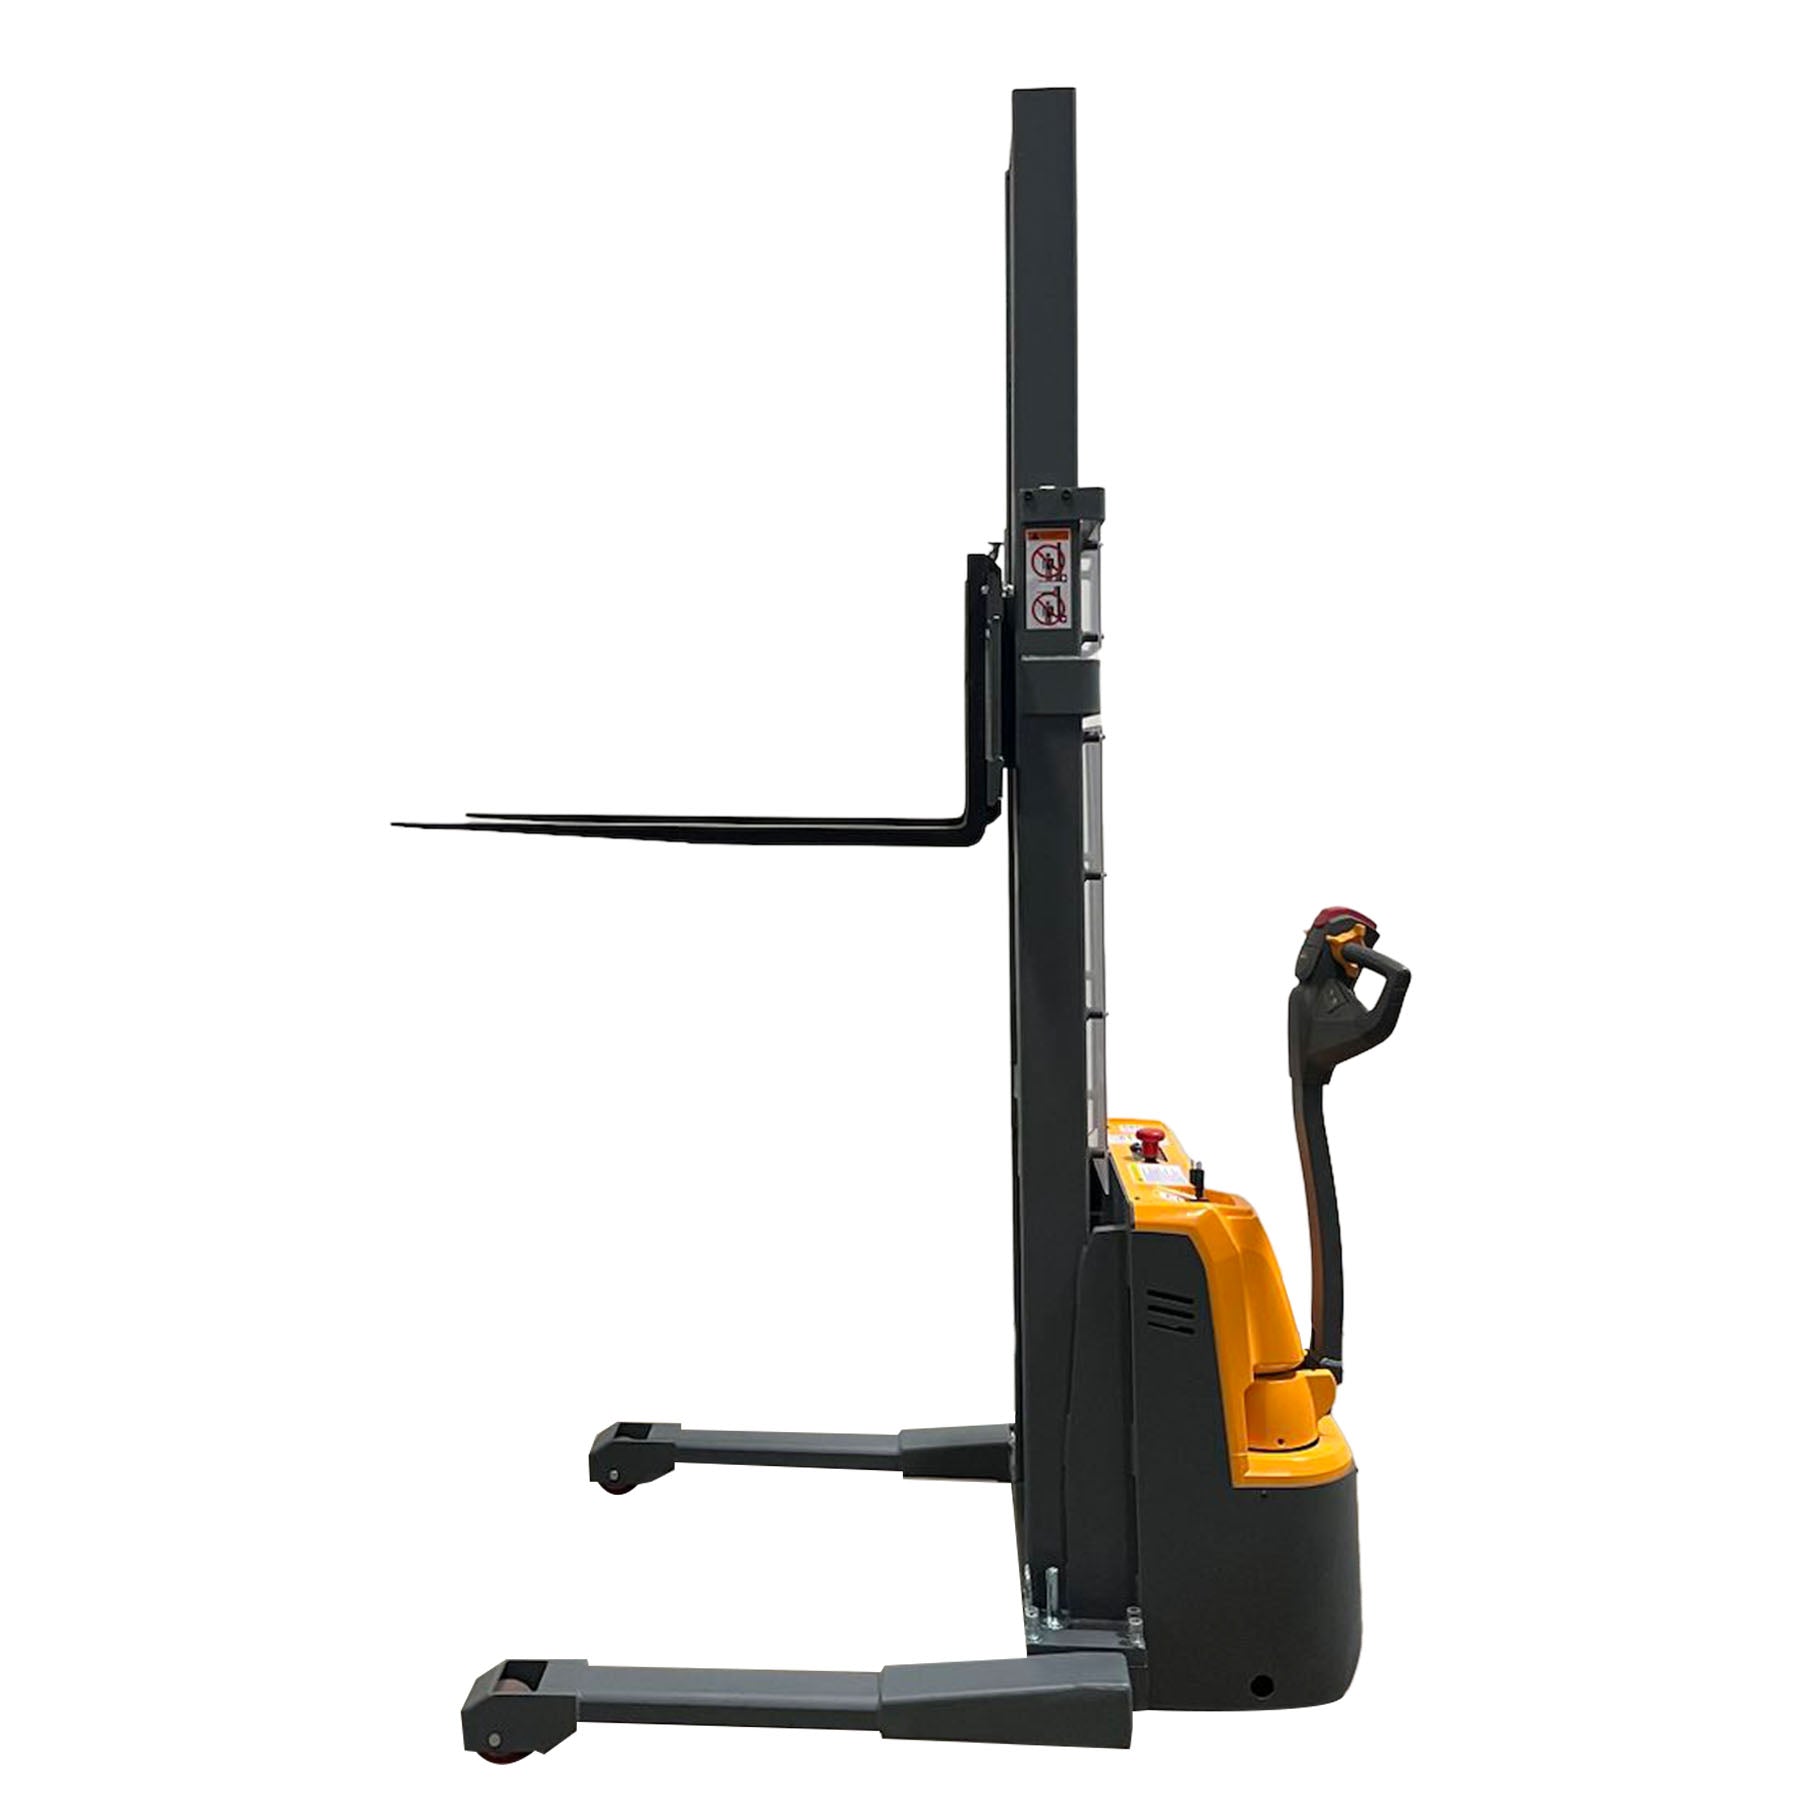 ApolloLift | Forklift Lithium Battery Full Electric Walkie Stacker 2640lbs Cap. Straddle Legs. 118" lifting A-3035